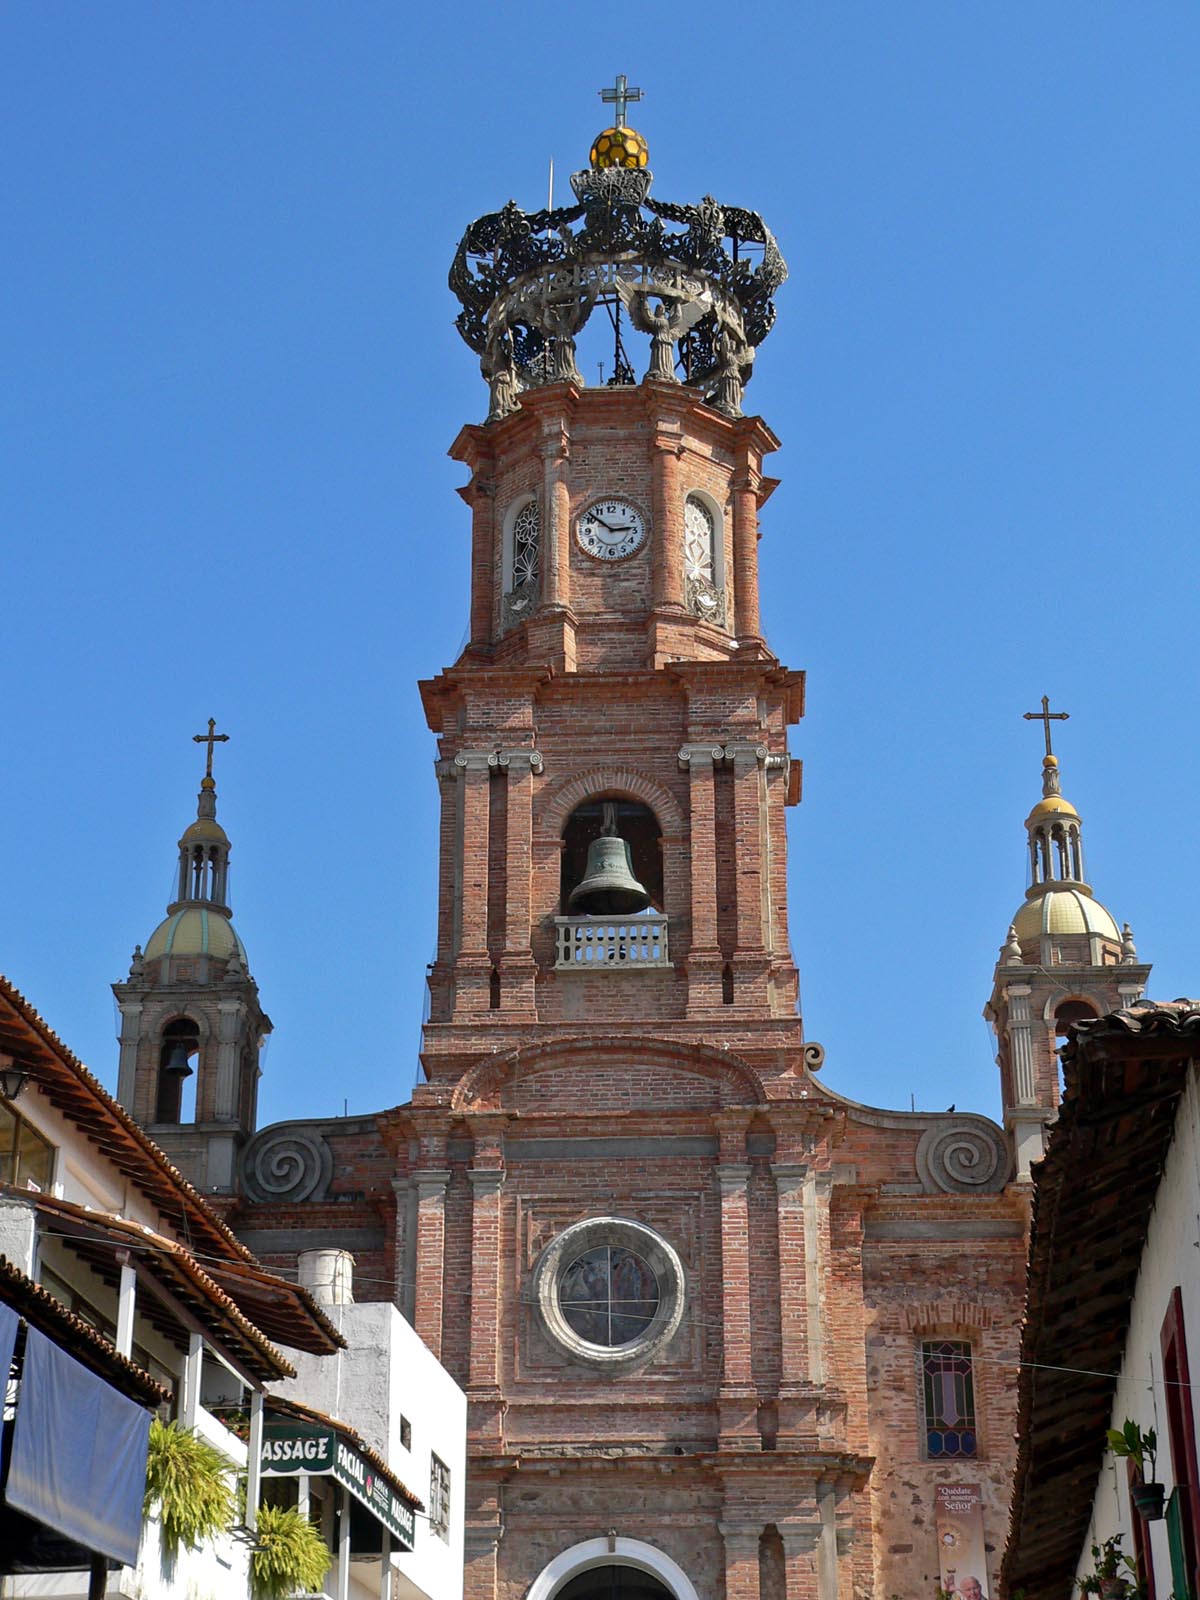 A local icon, The Church of Our Lady of Guadalupe dominates the Puerto Vallarta skyline with its recognisable wrought iron crown